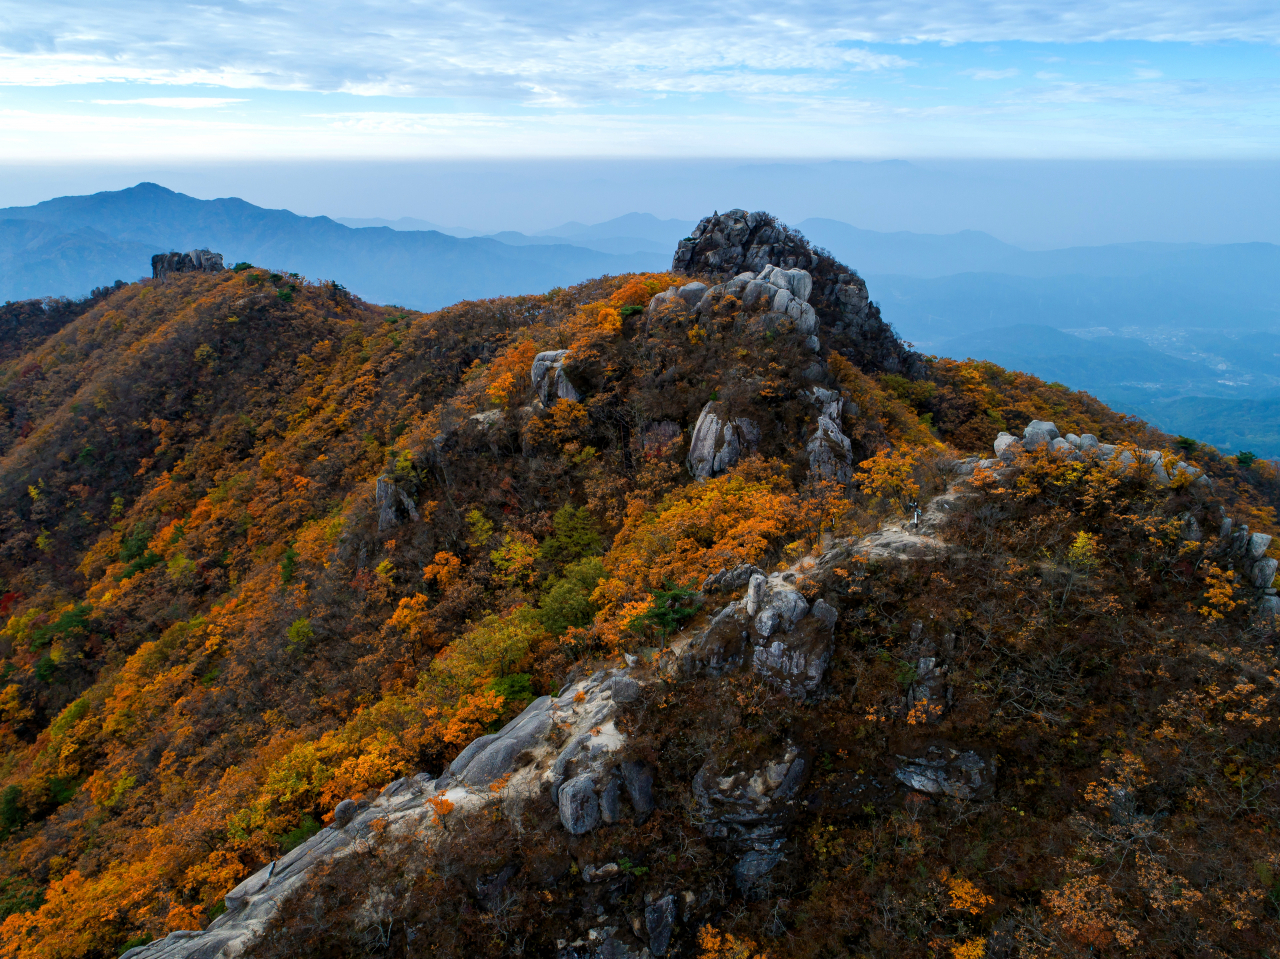 Mount Palgong in the autumn season (Ministry of Environment)